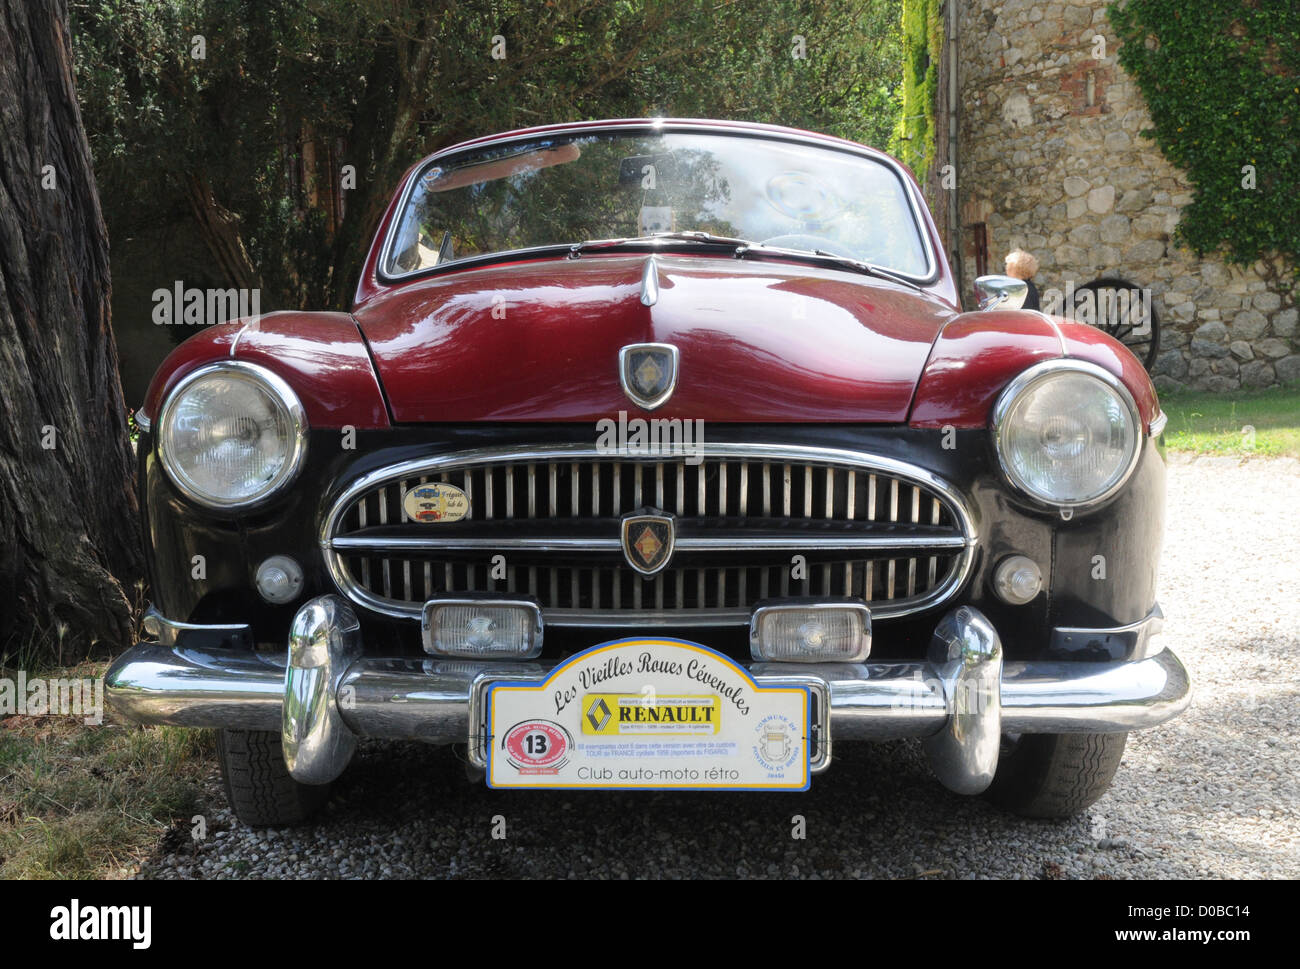 Renault dating from 1956. This is the car used by reporters from the French newspaper Le Figaro to report the Tour de France. Stock Photo